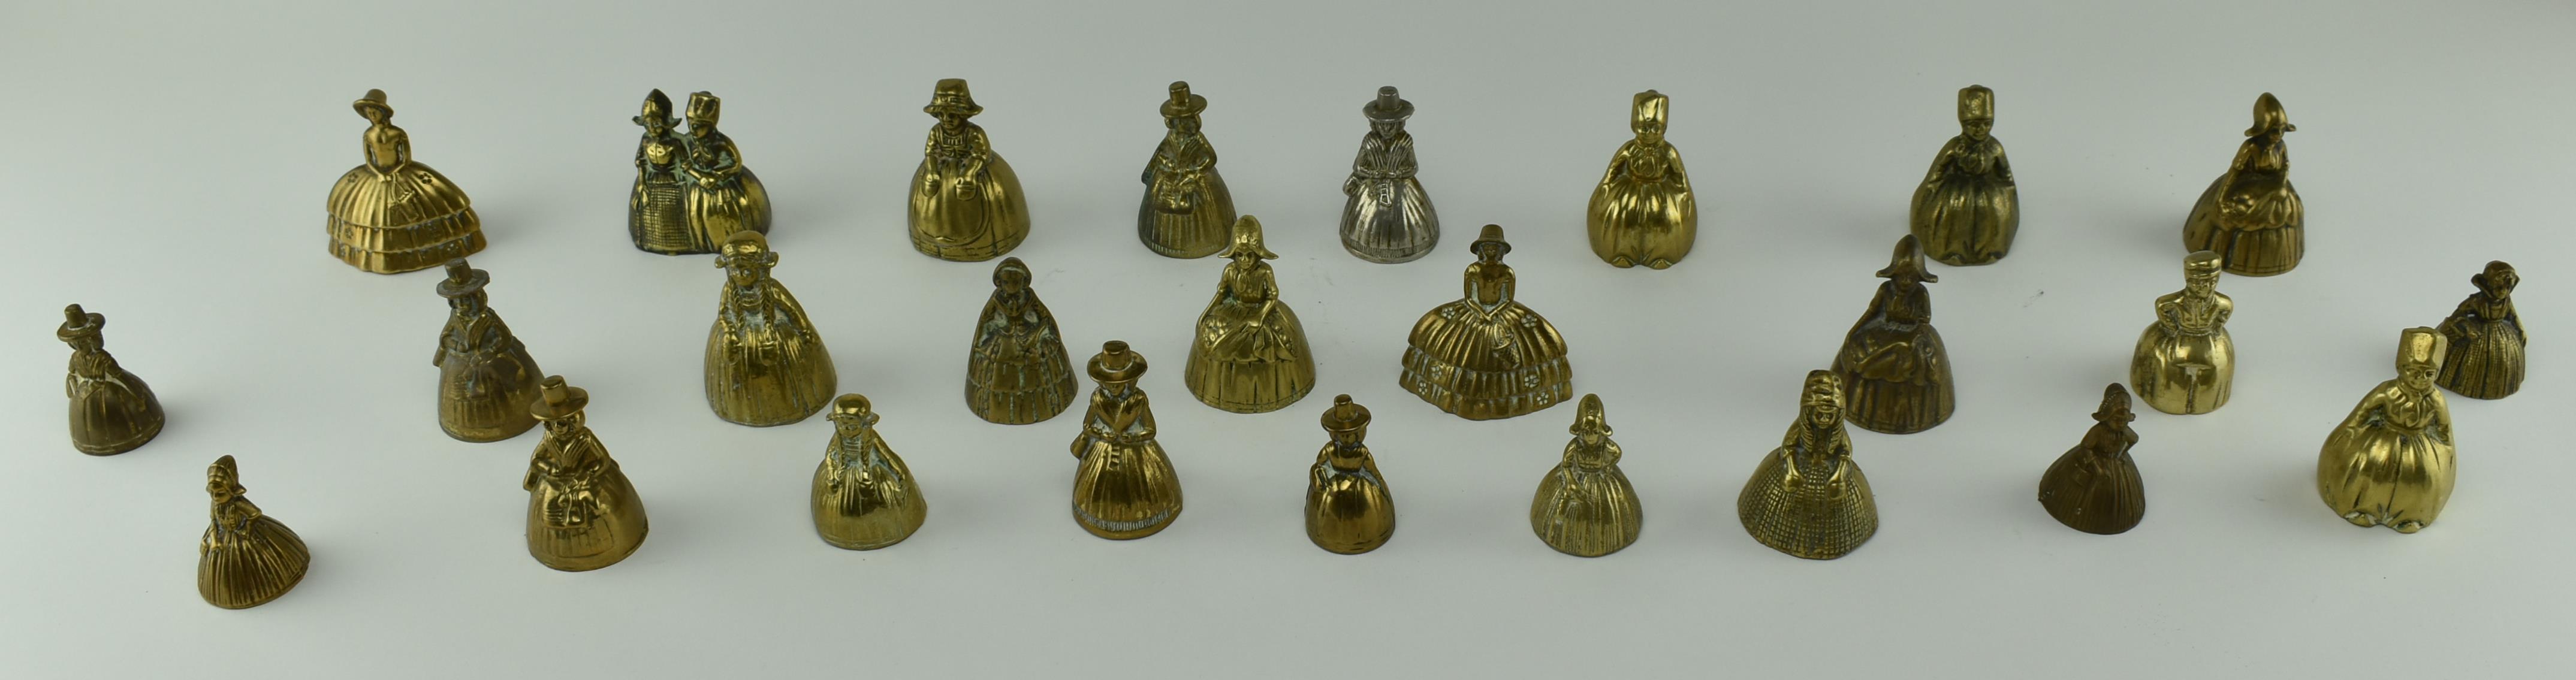 A COLLECTION OF 26 VICTORIAN DUCTH MINIATURE BELLS